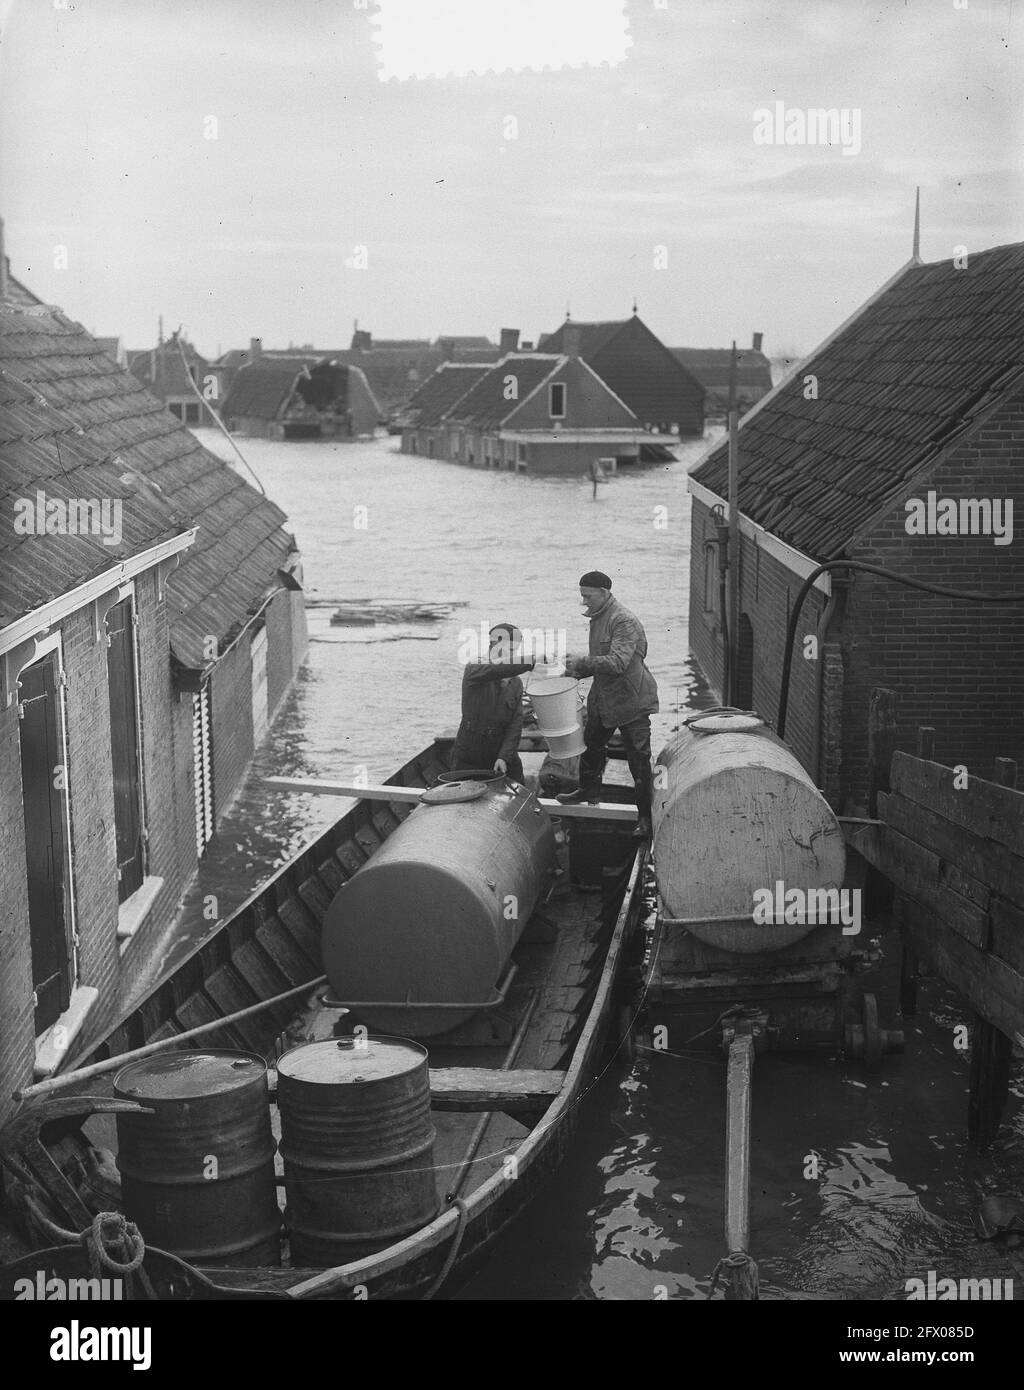 Schouwen Duiveland Nieuwerkerk . Supply of drinking water, April 2, 1953, floods, The Netherlands, 20th century press agency photo, news to remember, documentary, historic photography 1945-1990, visual stories, human history of the Twentieth Century, capturing moments in time Stock Photo